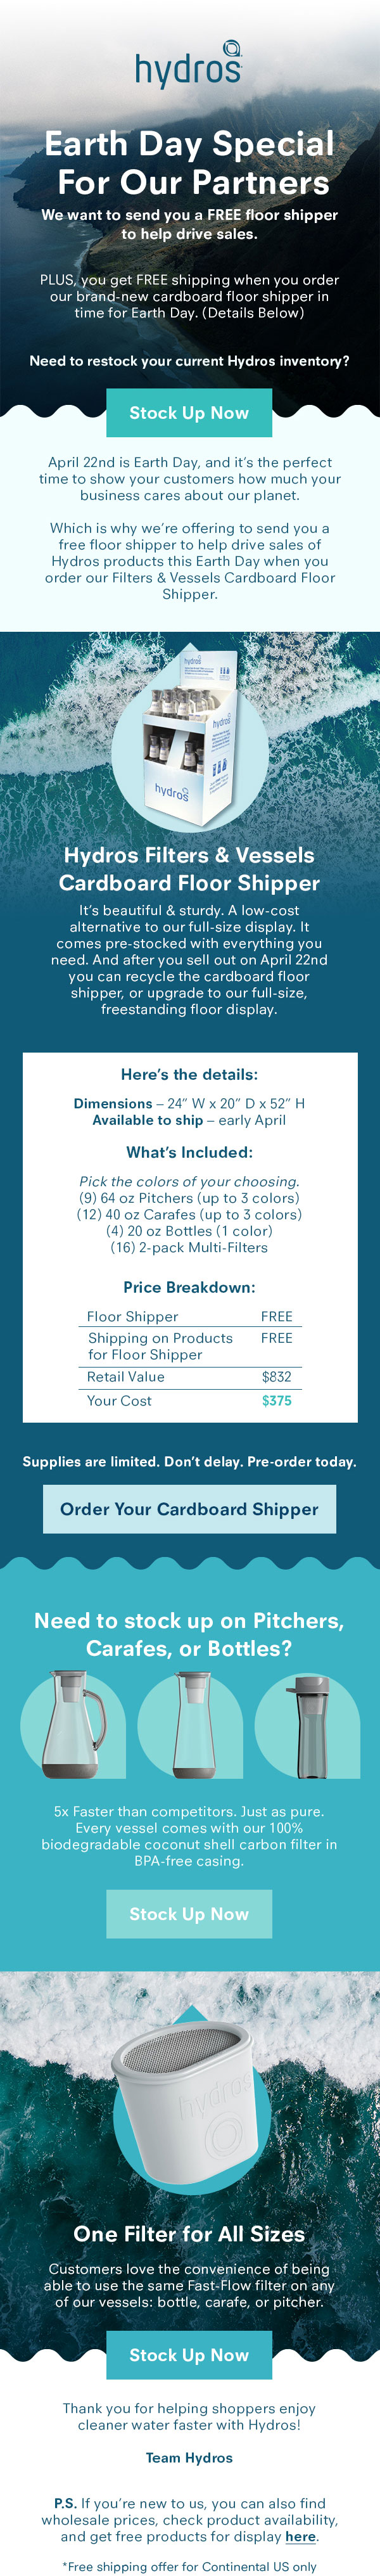 Hydros wholesale email design